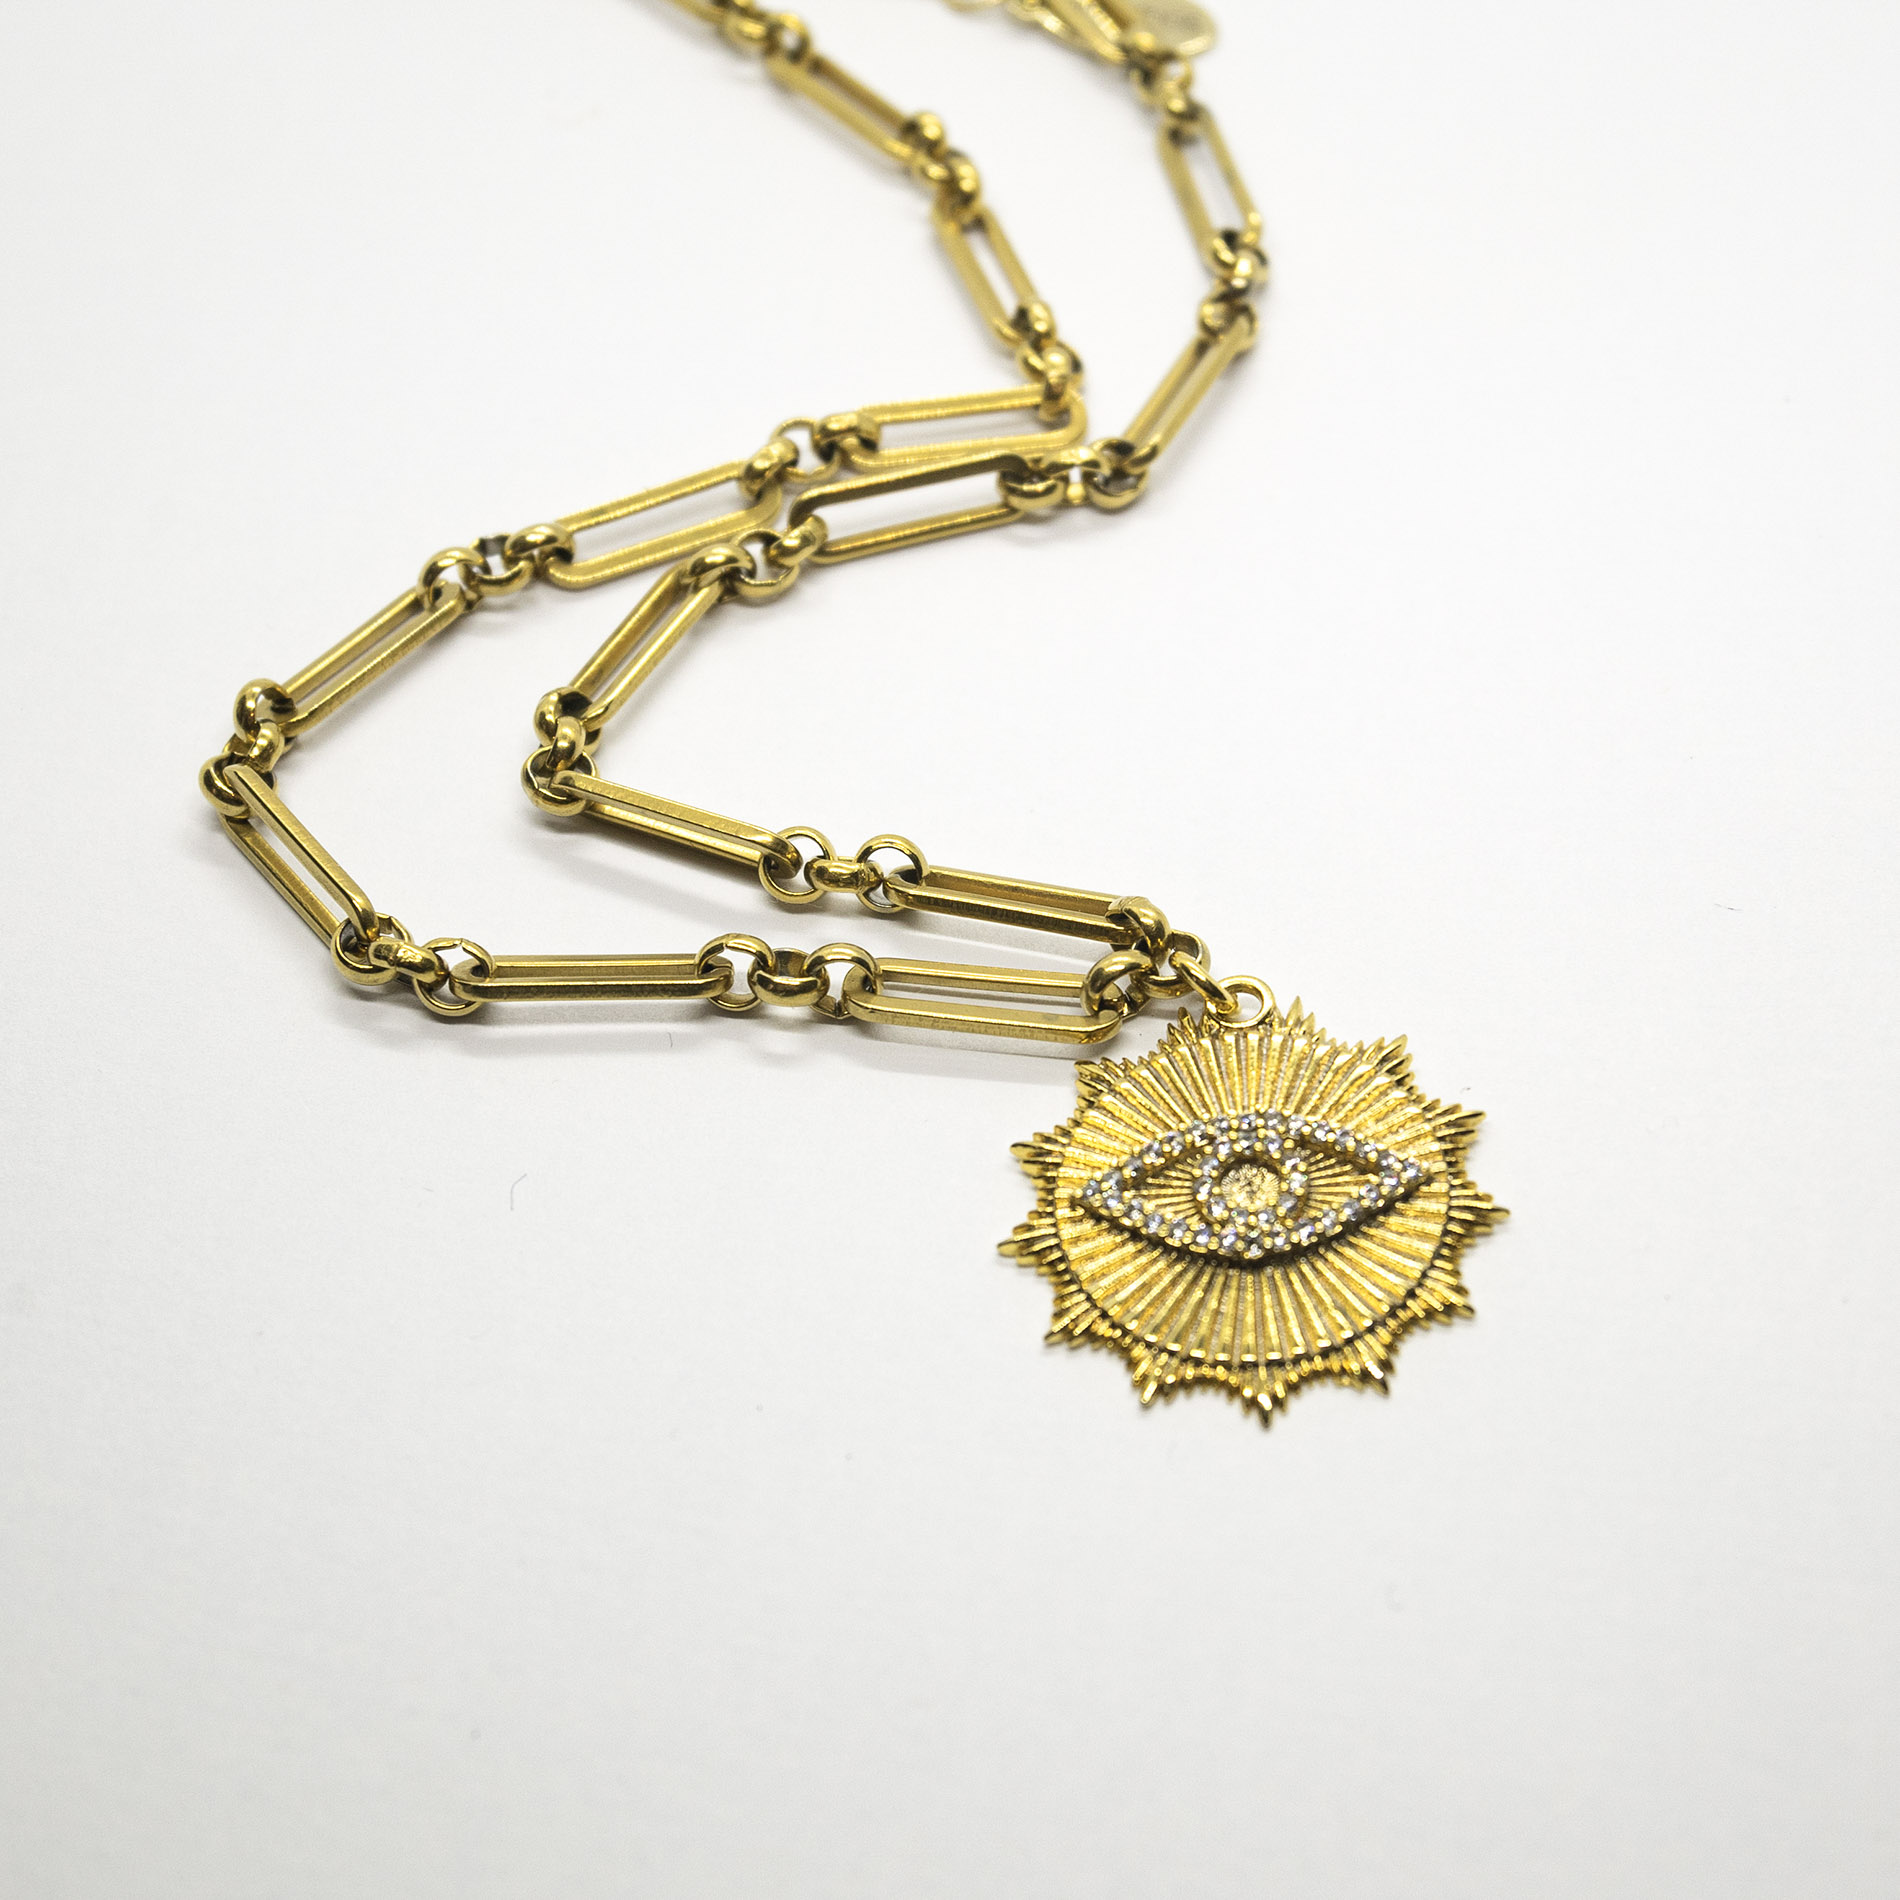 Necklace with stainless steal gold chain & gold plated evil eye zircon pendant.